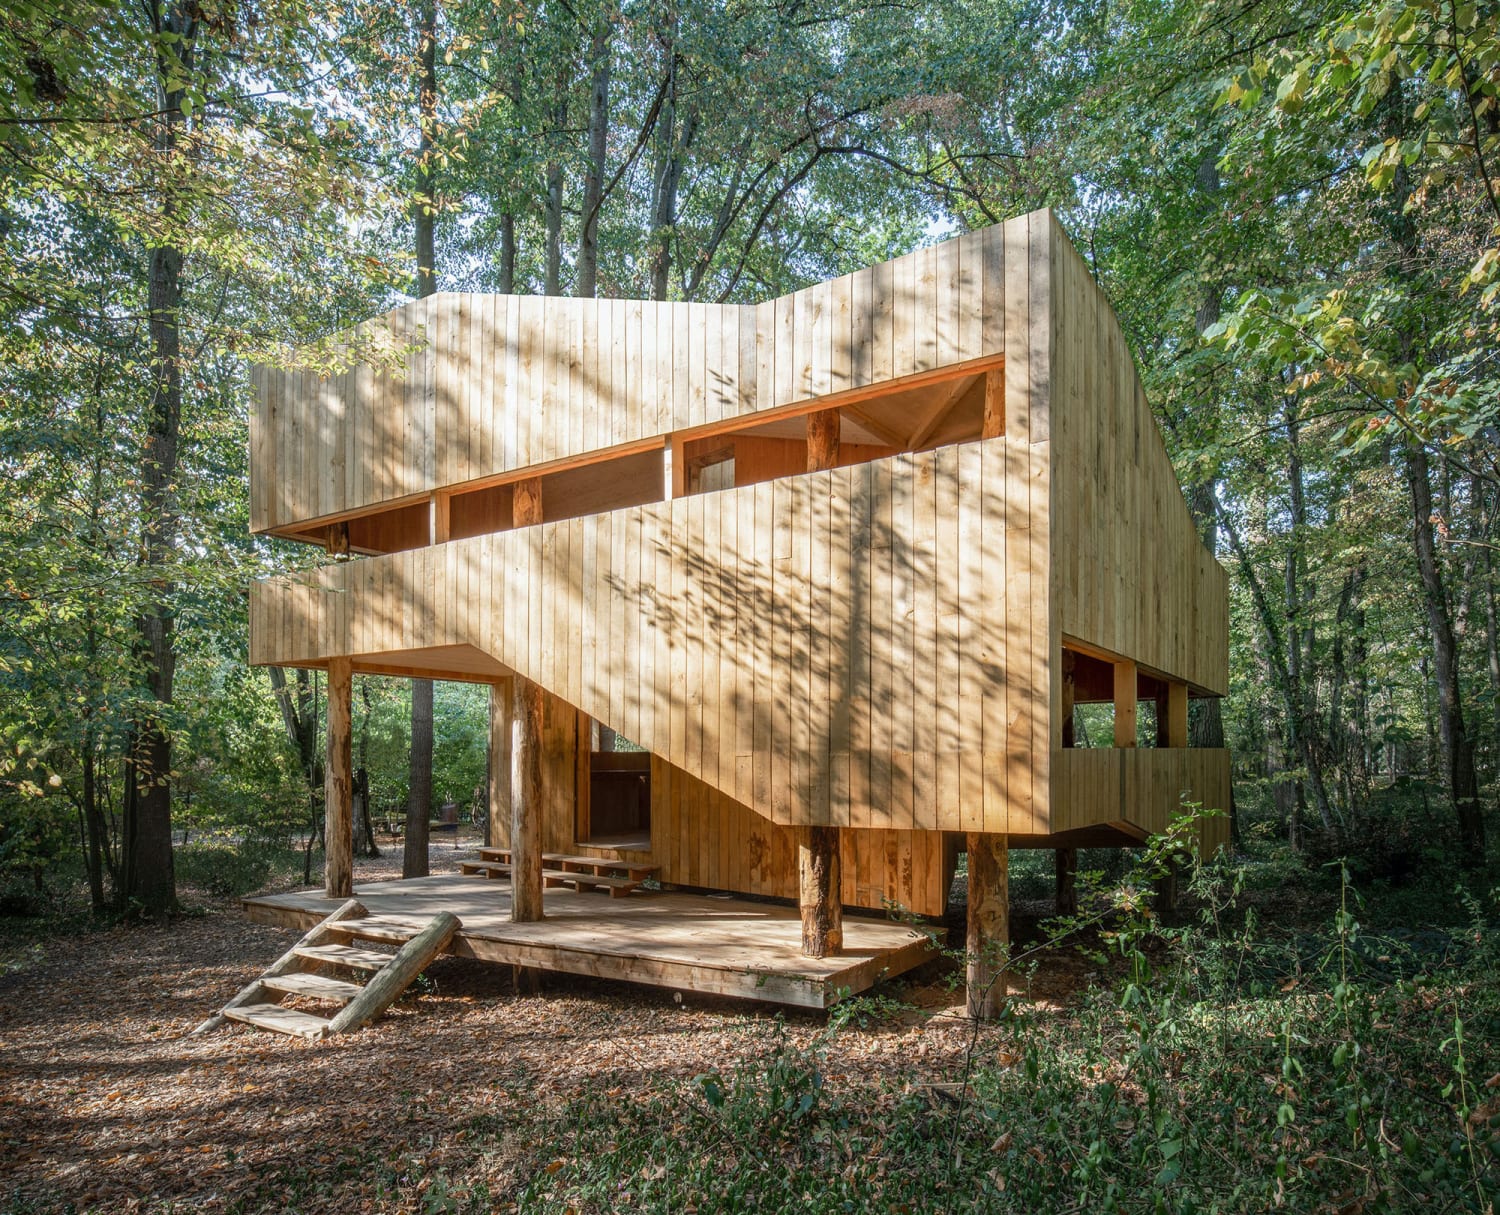 Wooden House / local-eu + SUPHASIDH